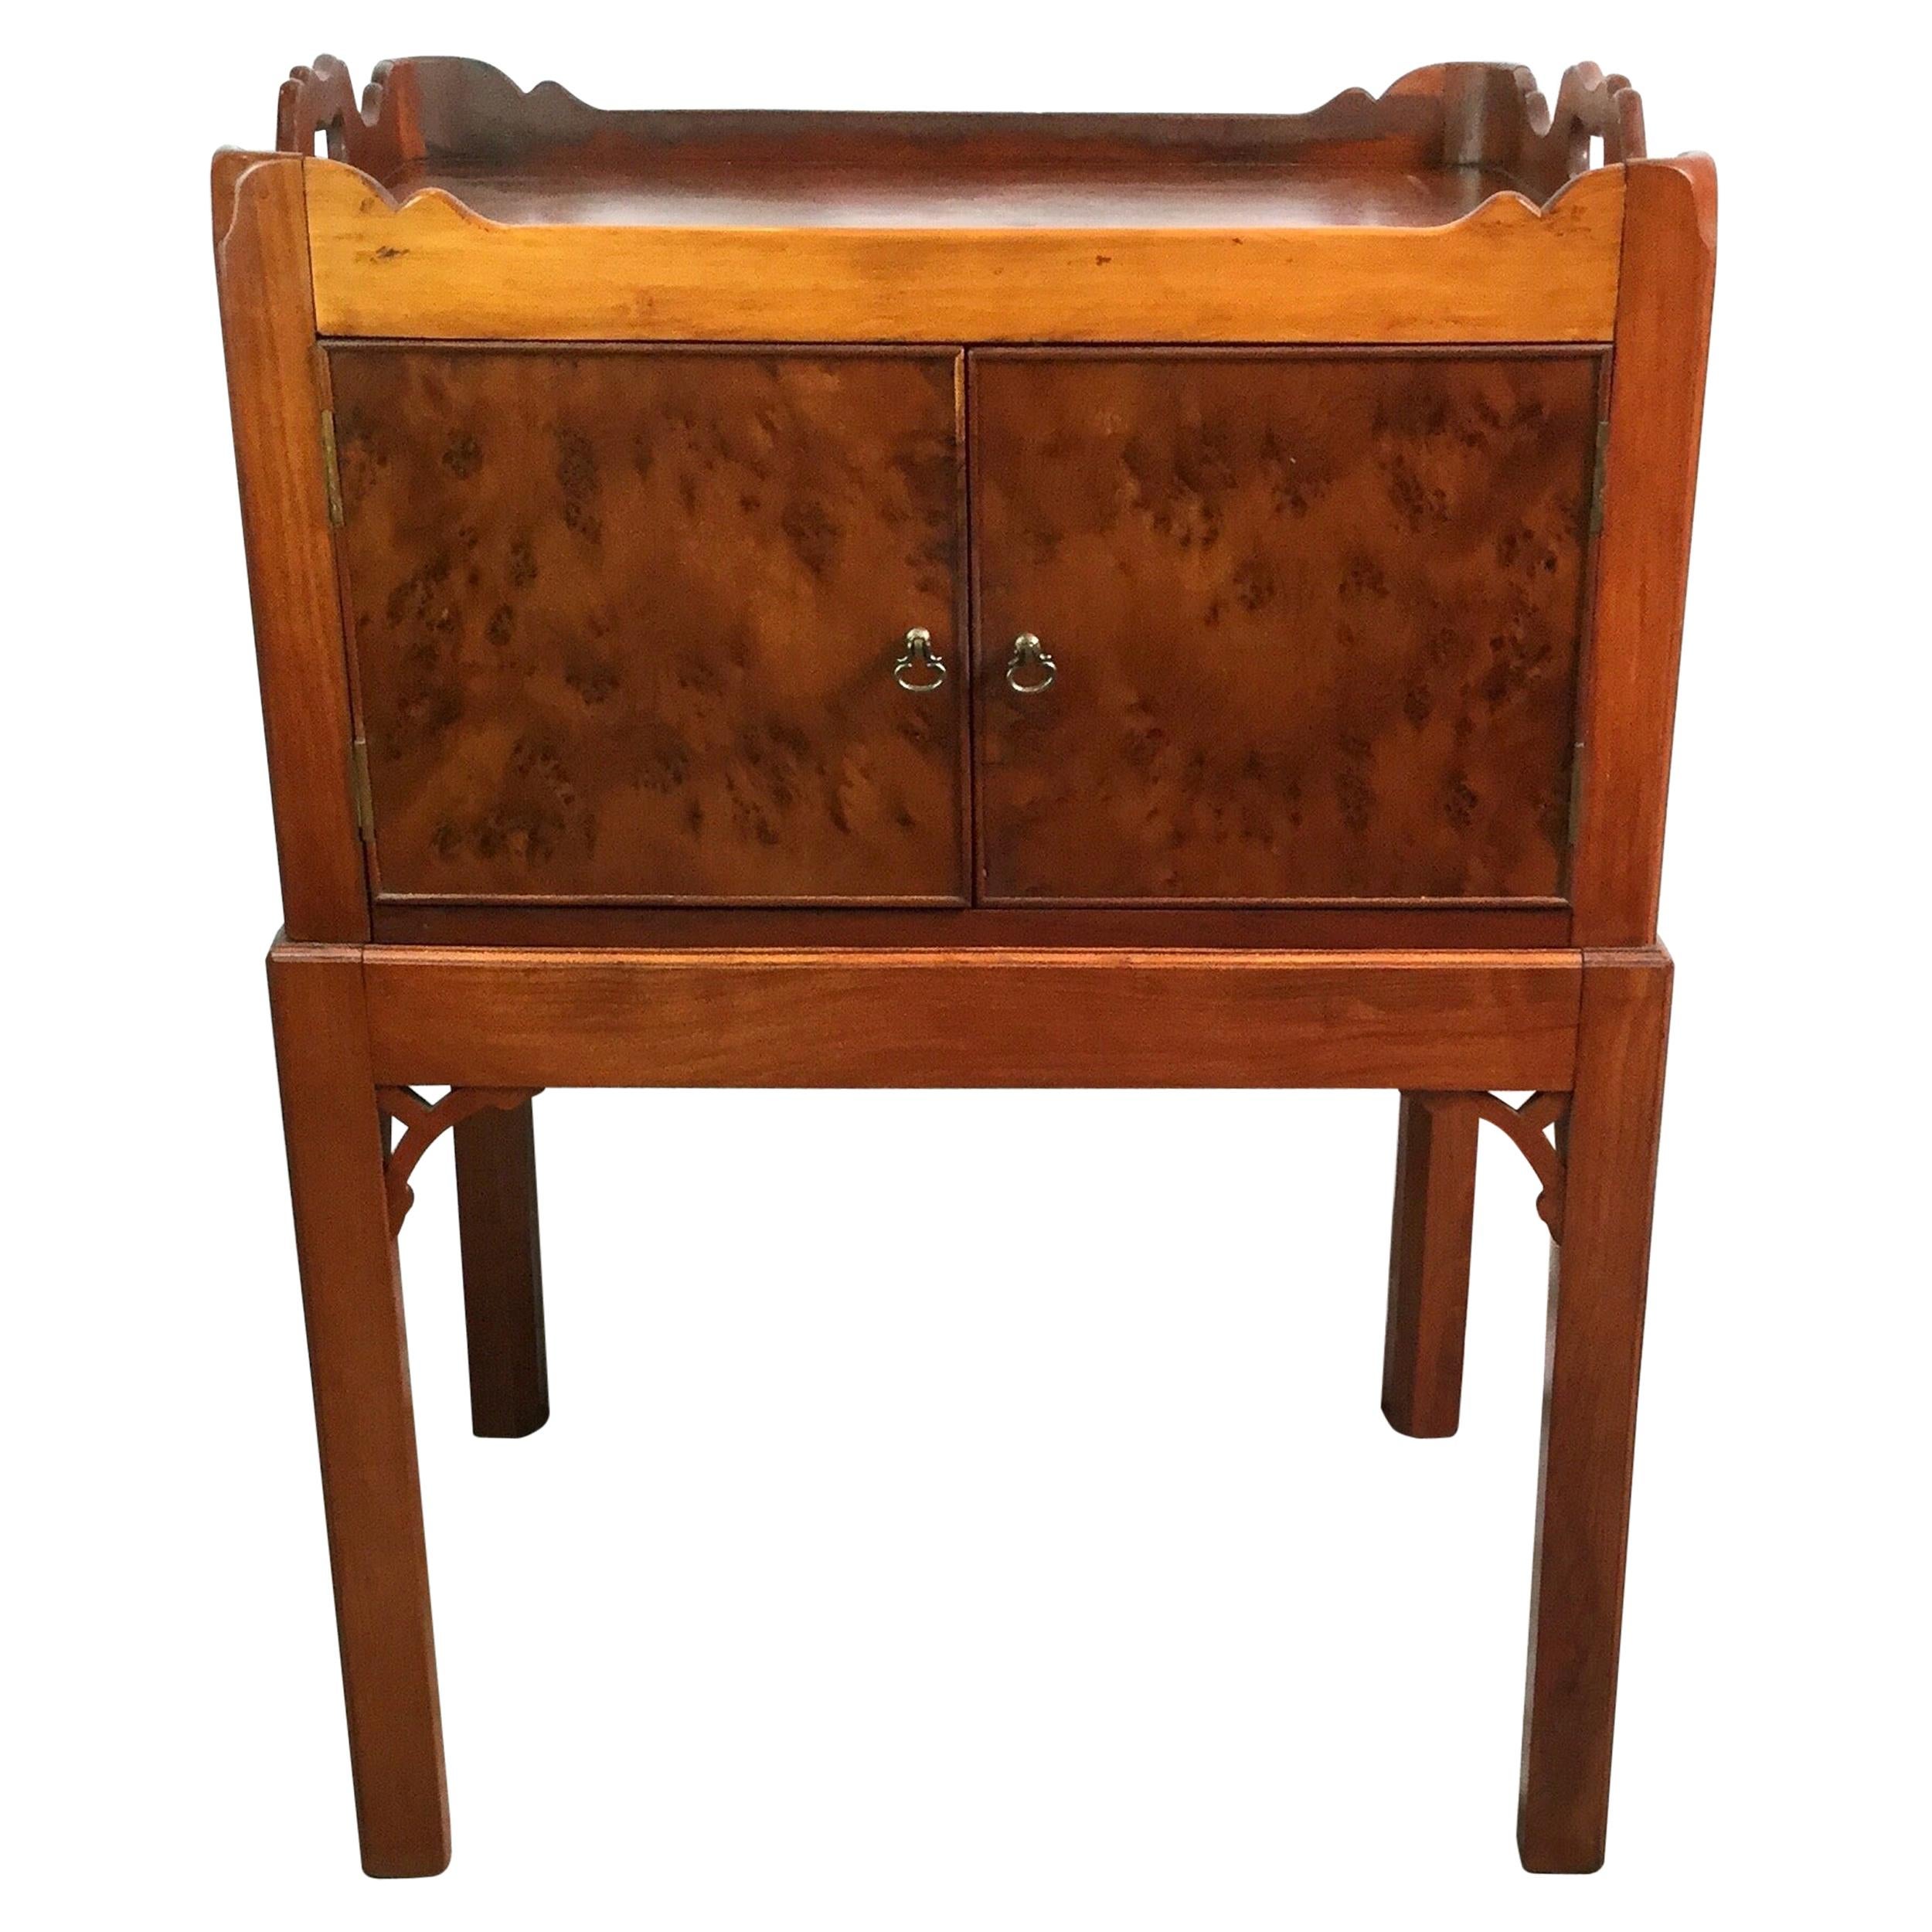 Yew Wood Cabinet on Frame with Gallery Top